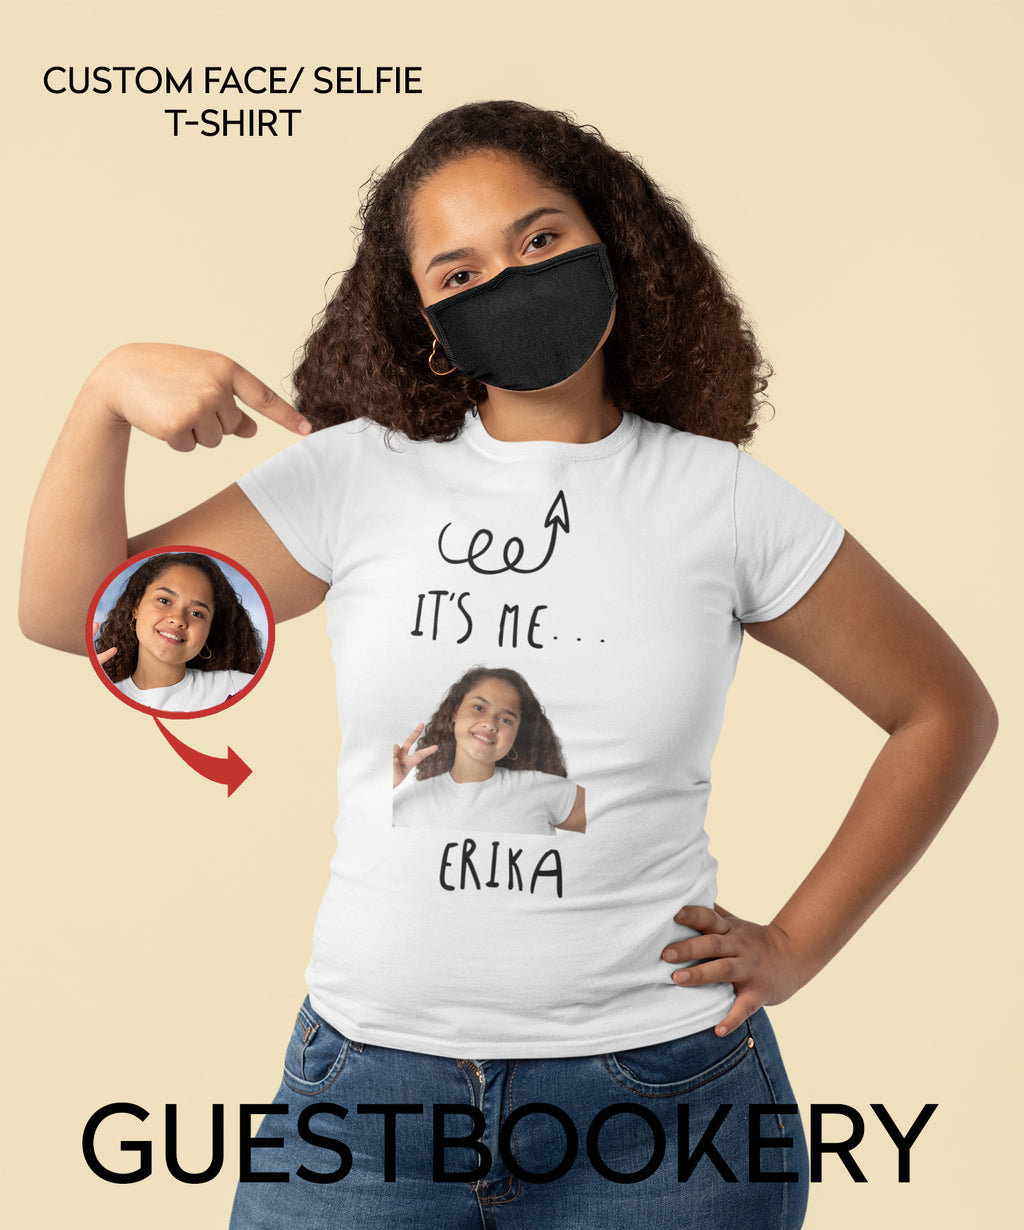 It's Me - Custom Face Mask T-shirt - Guestbookery